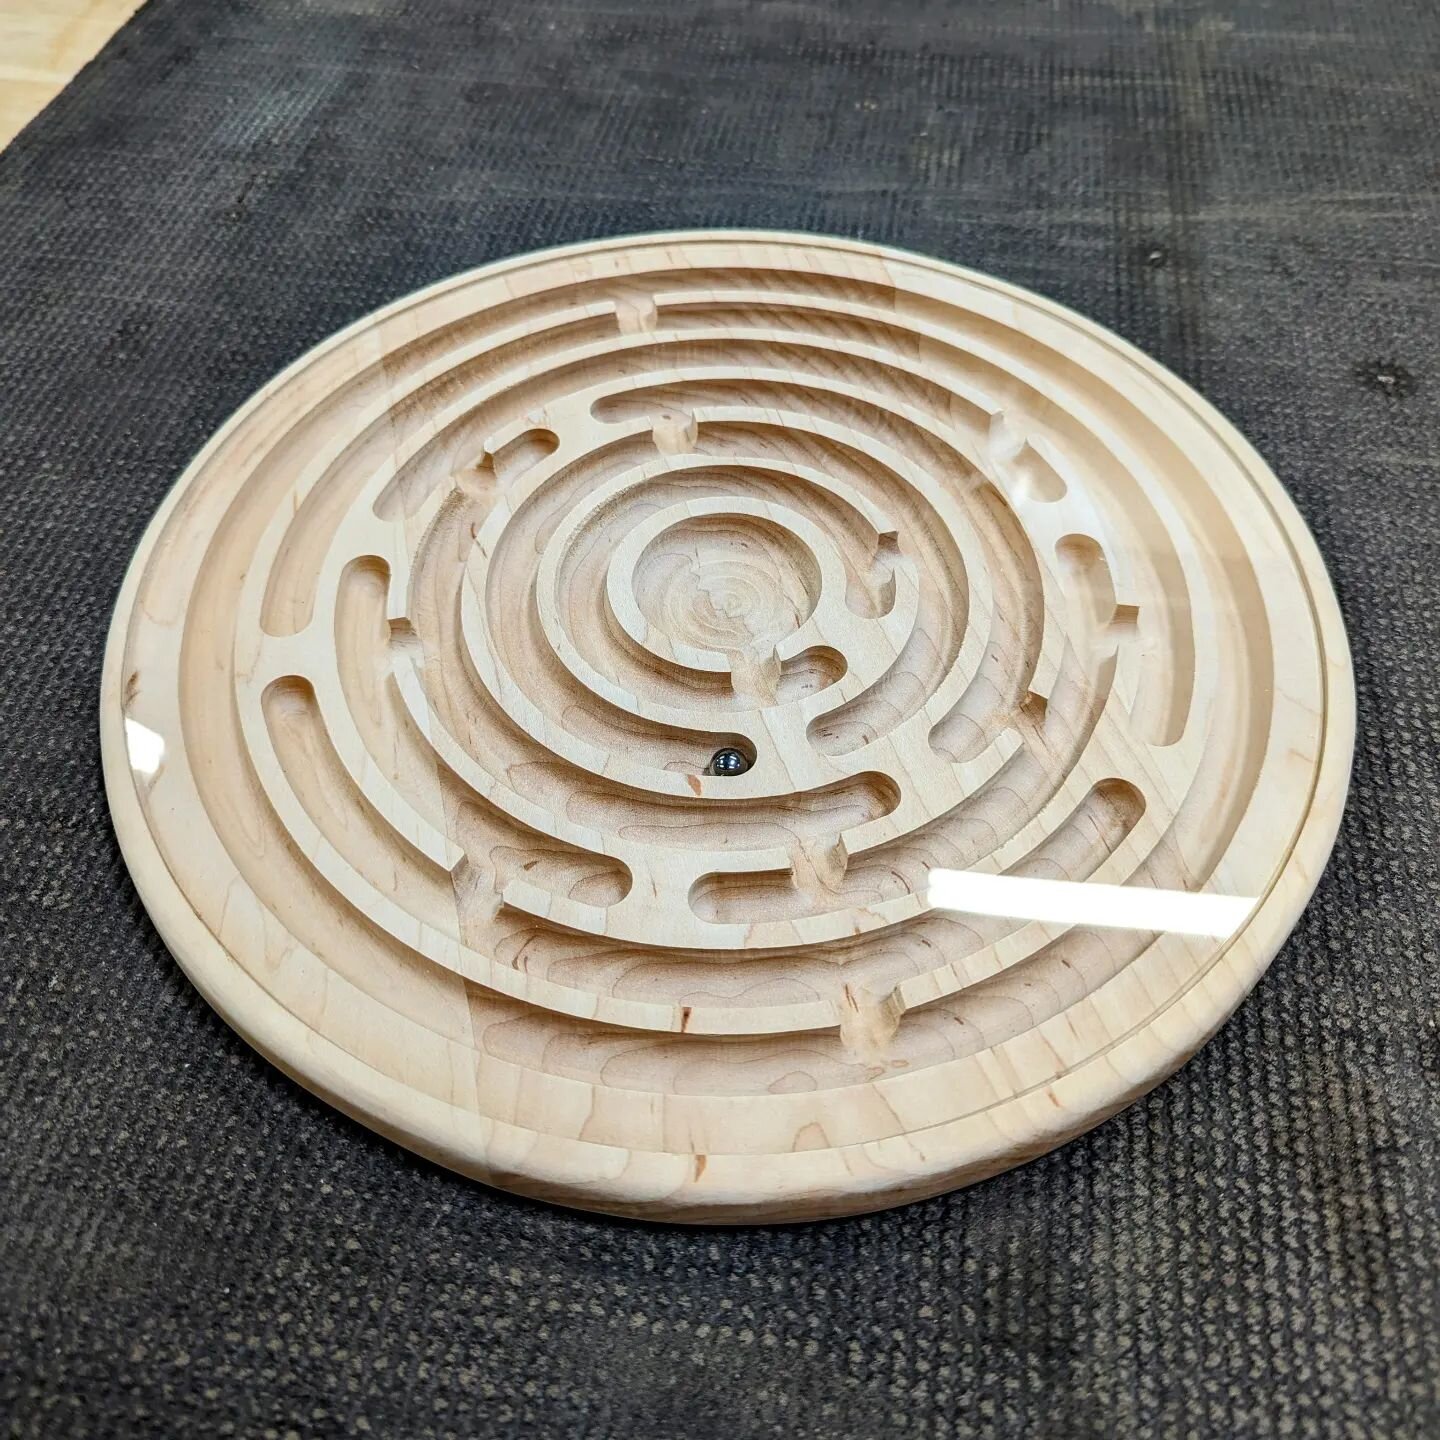 Just wrapped up this prototype for a magnet marble maze. Making several for a summer reading program for a library system. This one is 12&quot; and there will also be a larger 22&quot; size.
.
.
.
#c2woodcraft #woodworking #denver #englewood #localbu